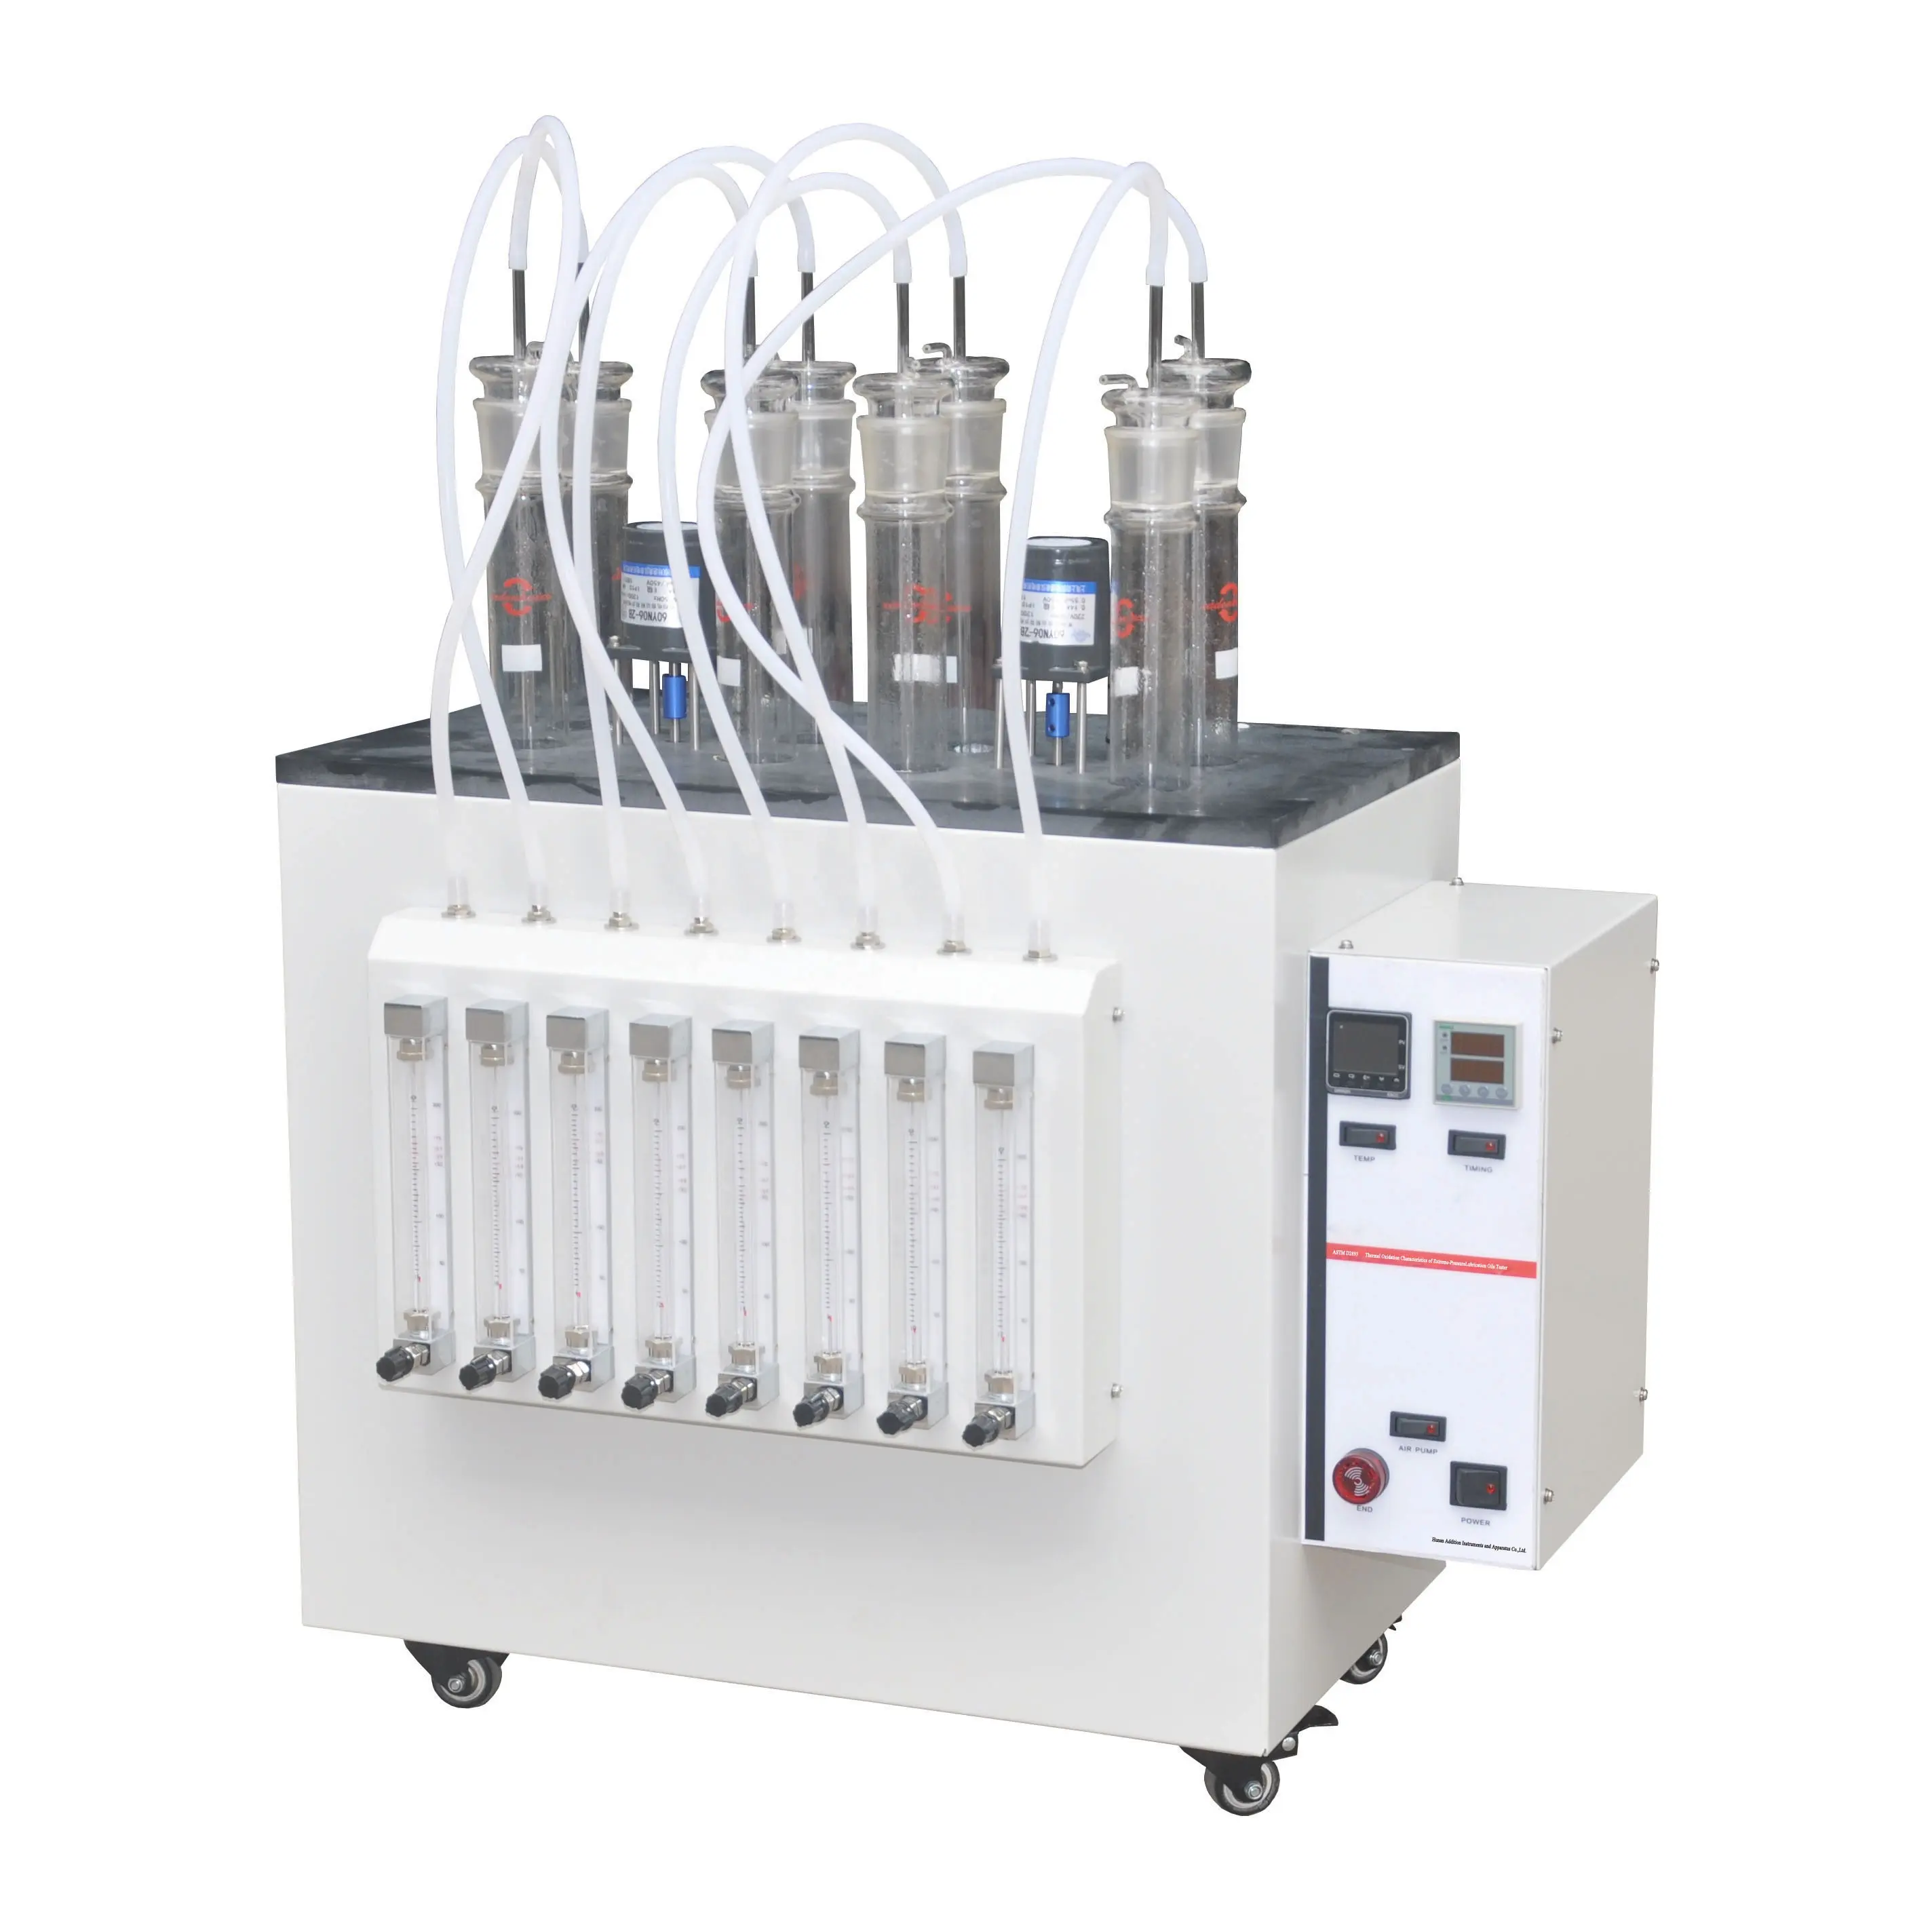 ASTM D2893 Thermal Oxidation Characteristics of Extreme Pressure Lubrication Oils Tester Extreme Pressure Analyzer